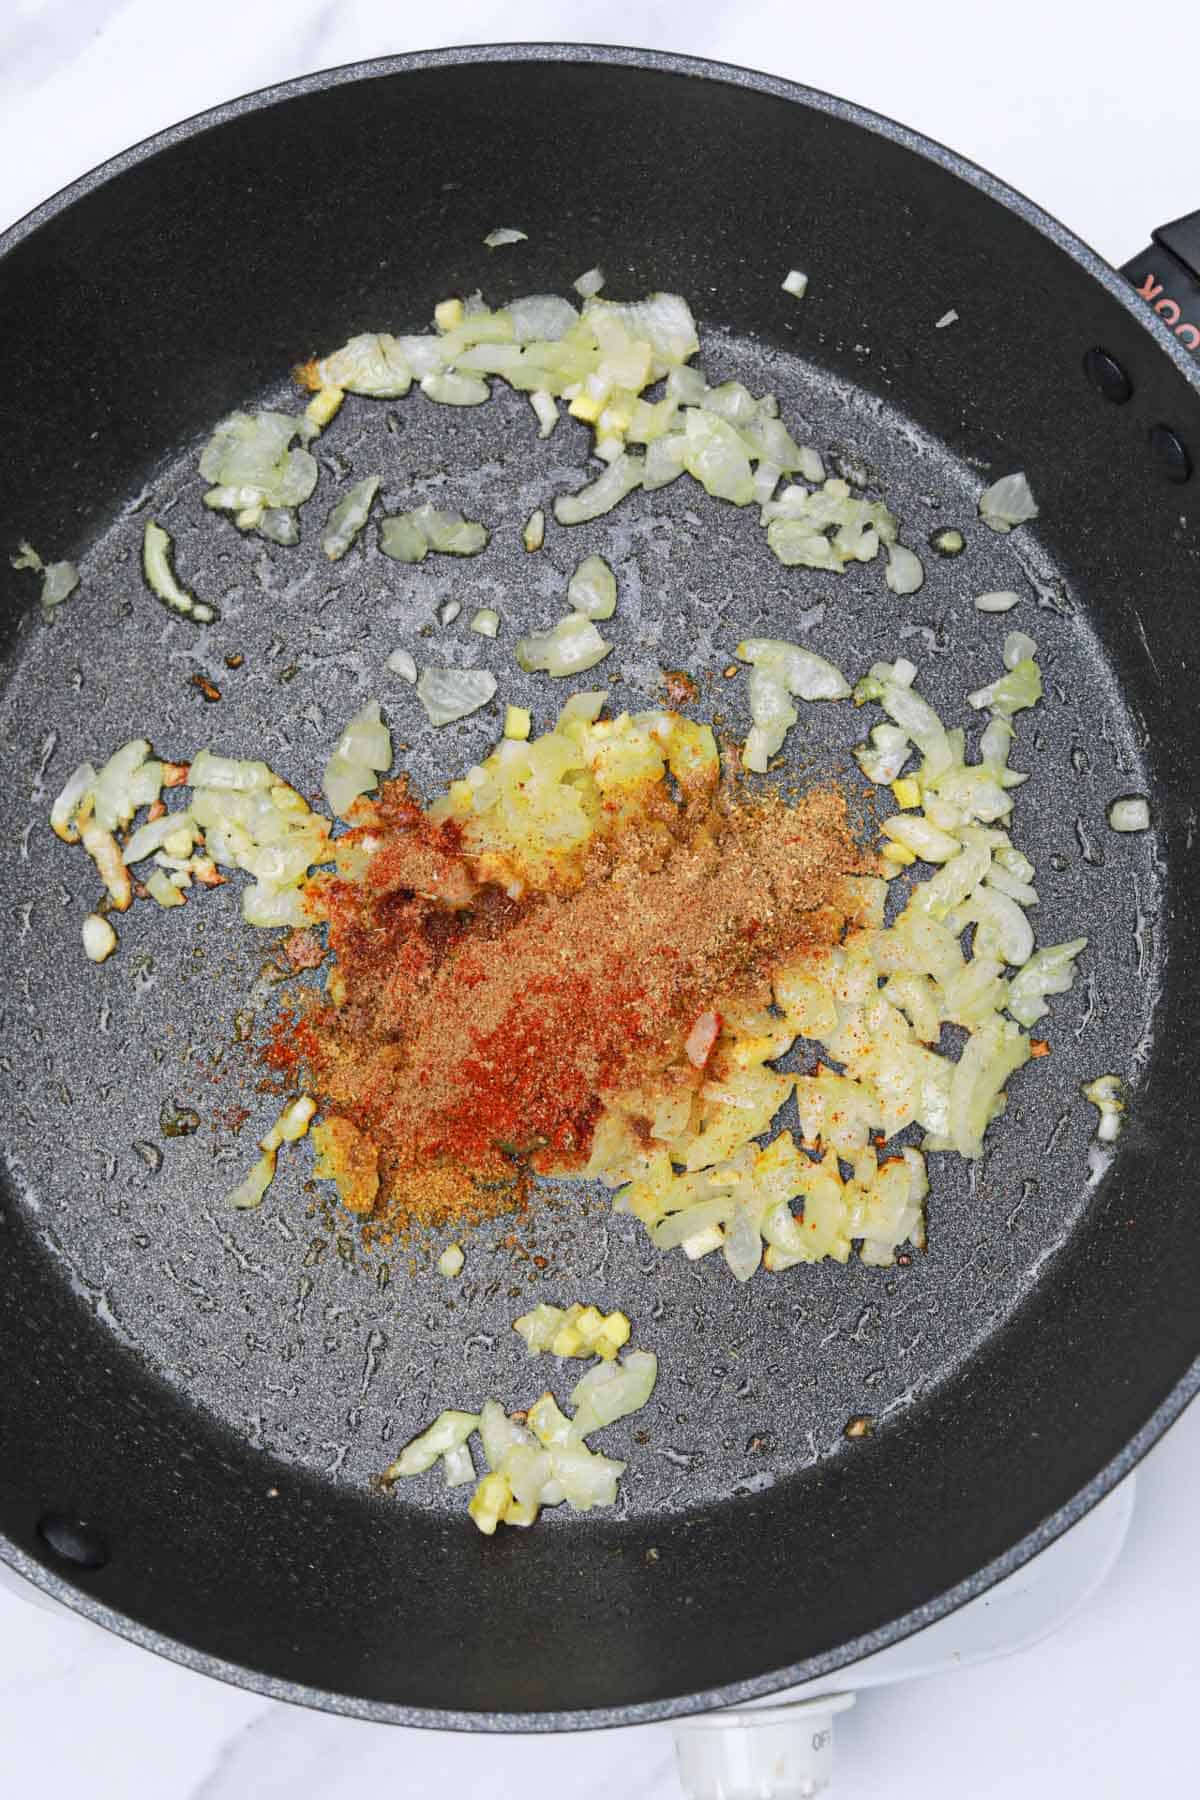 spices added to the skillet.